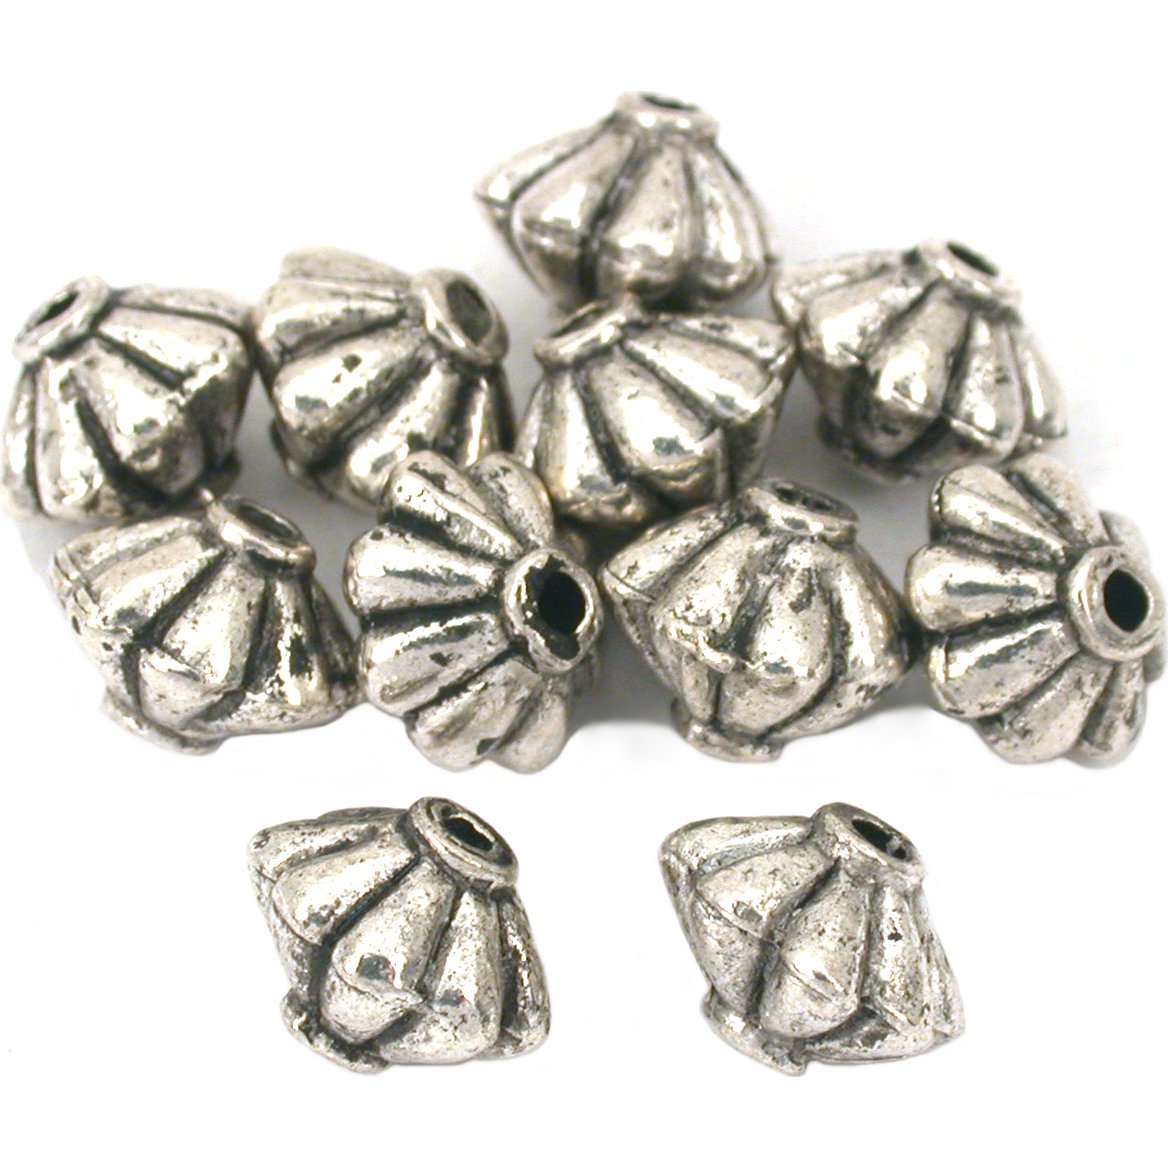 Bali Fluted Saucer Beads Antique Silver Plated 9mm 10Pcs Approx.